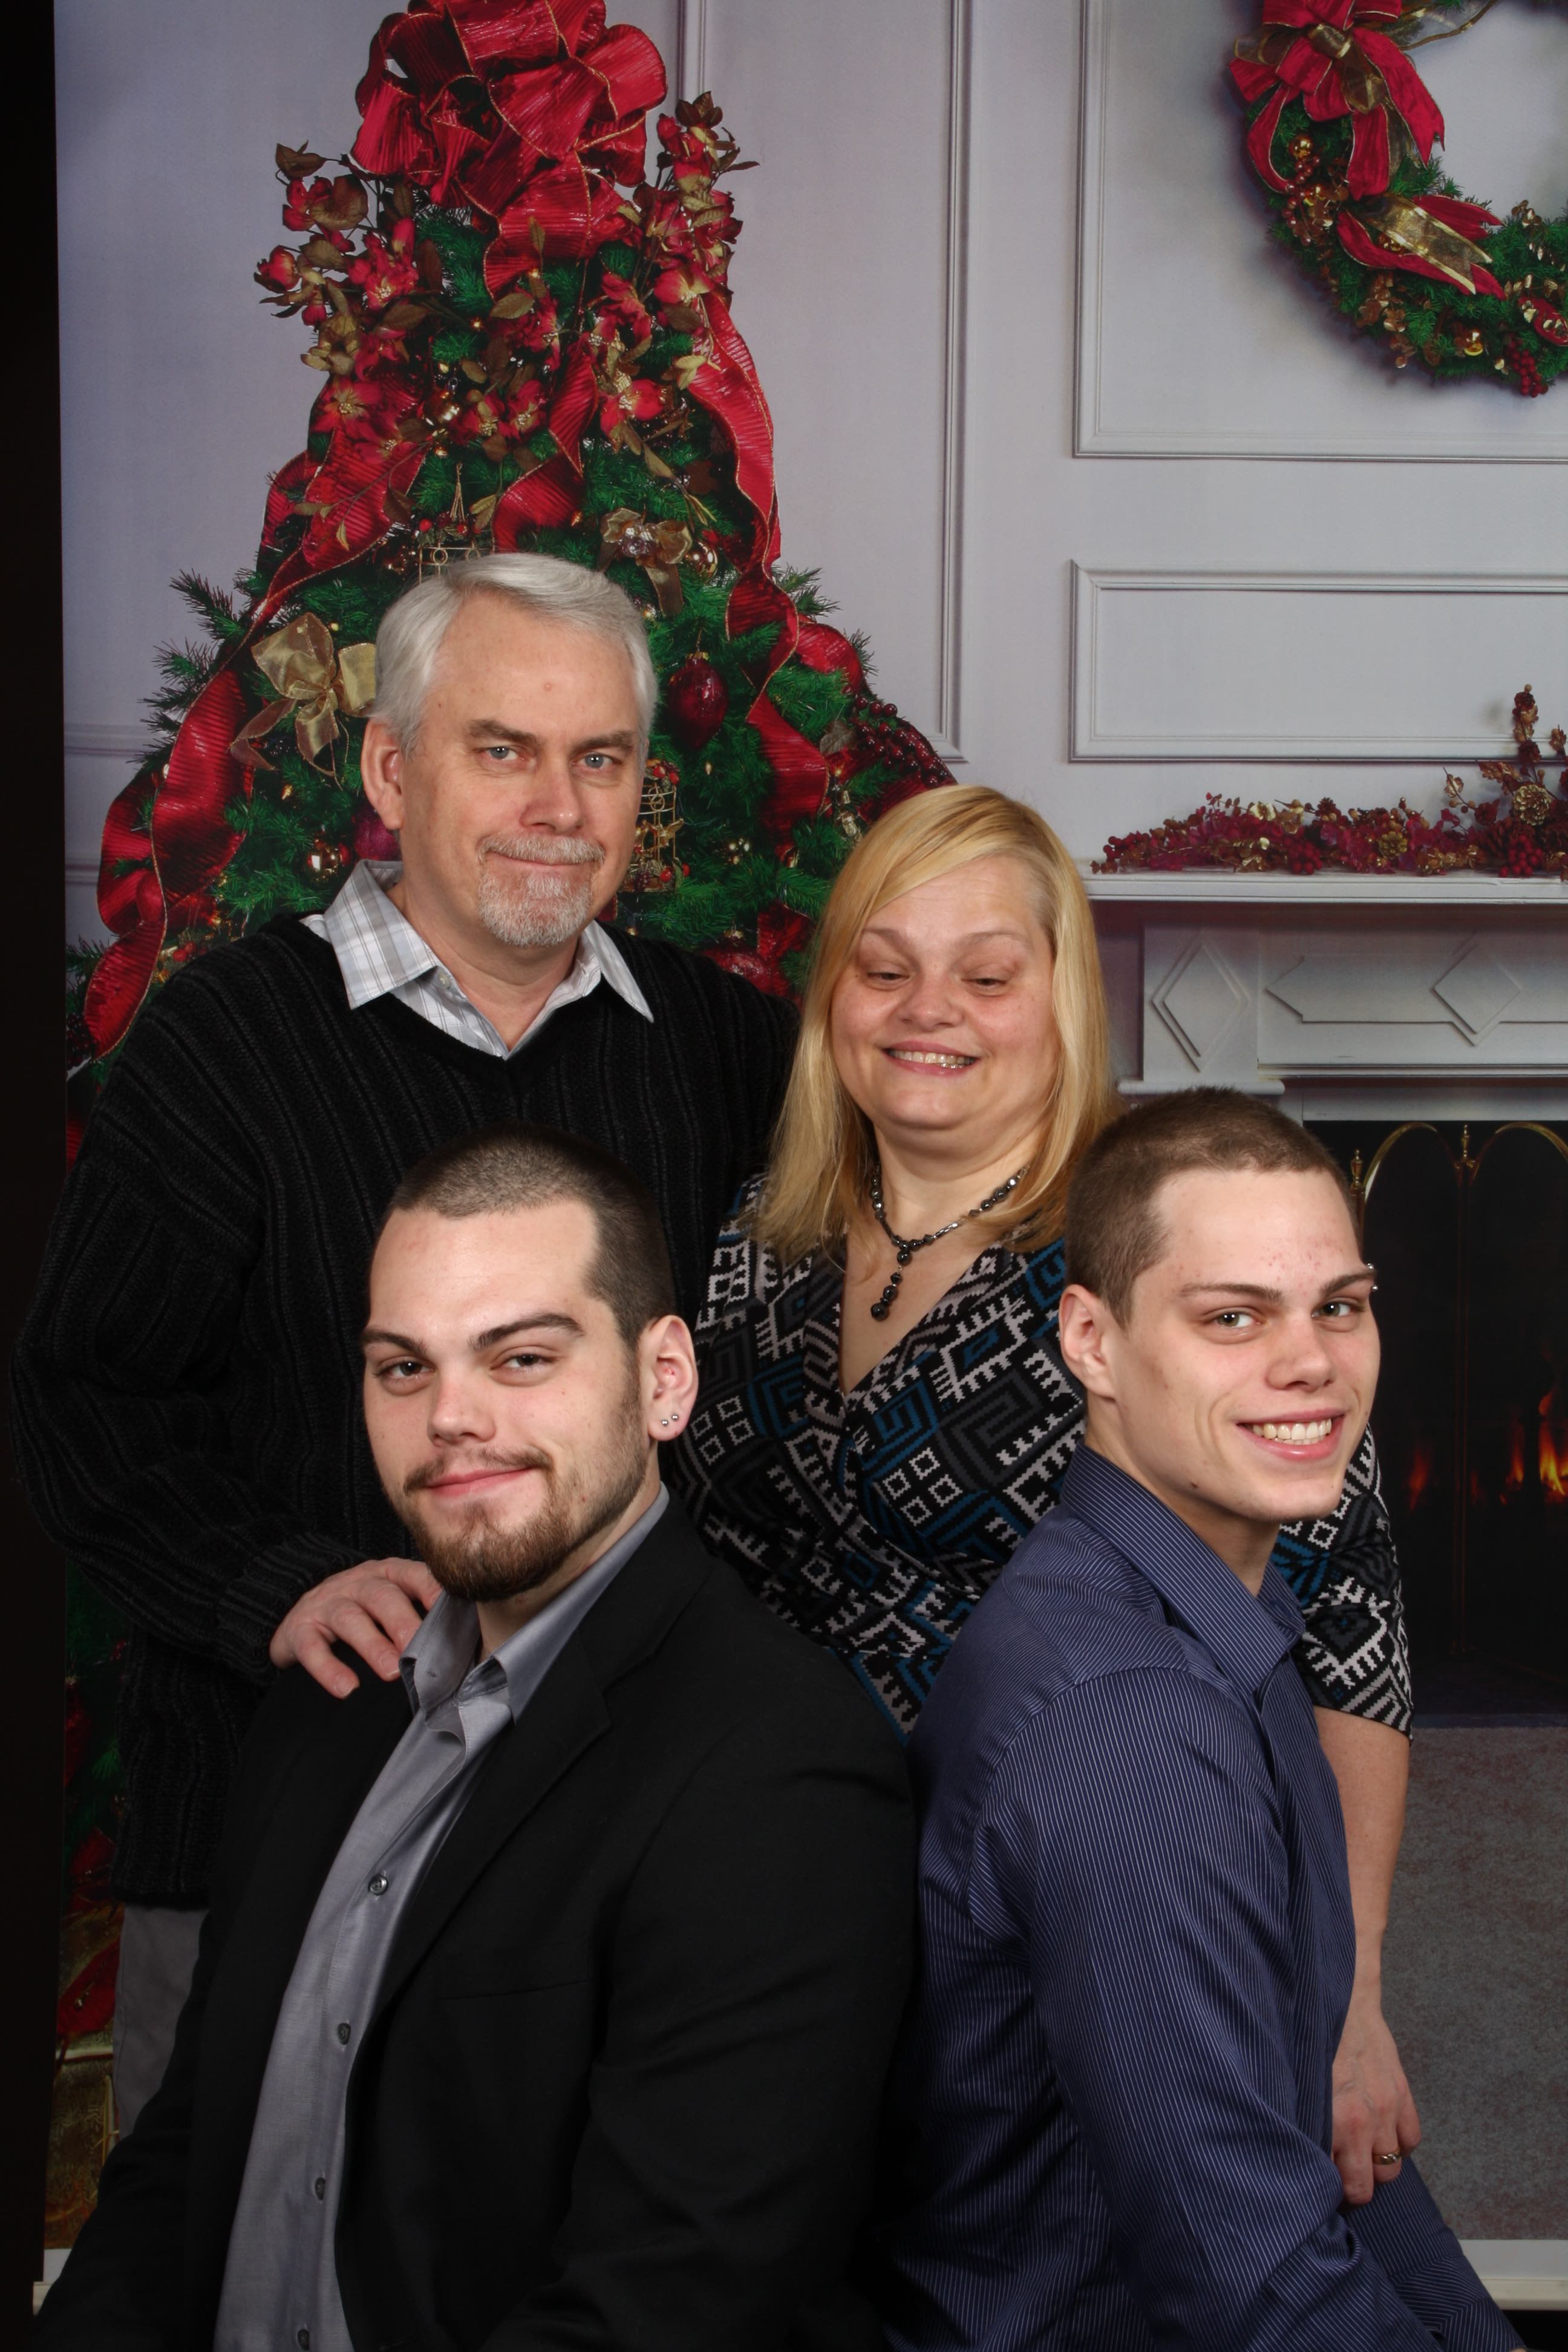 A family Christmas card photo. Rhonda, her husband, and her two adult boys pose for a portrait. A Christmas tree and wreath are displayed in the background.